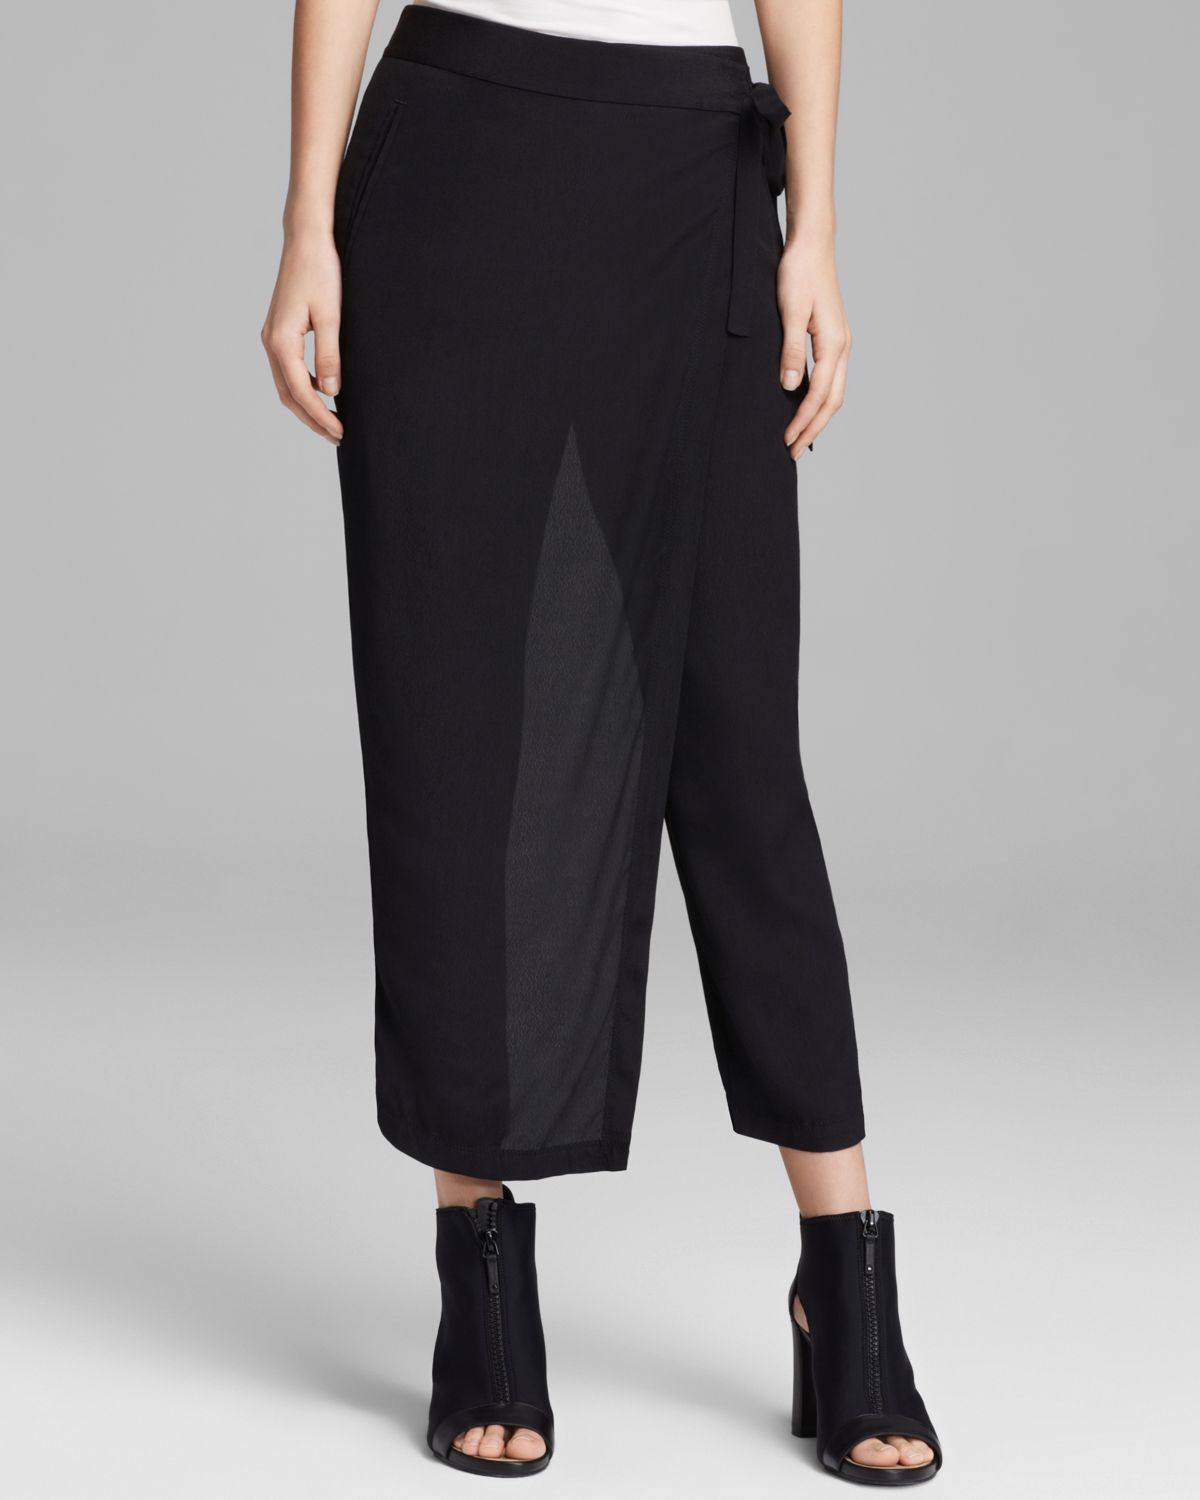 Lyst - Dkny Pure Front Skirt Overlay Pants in Black